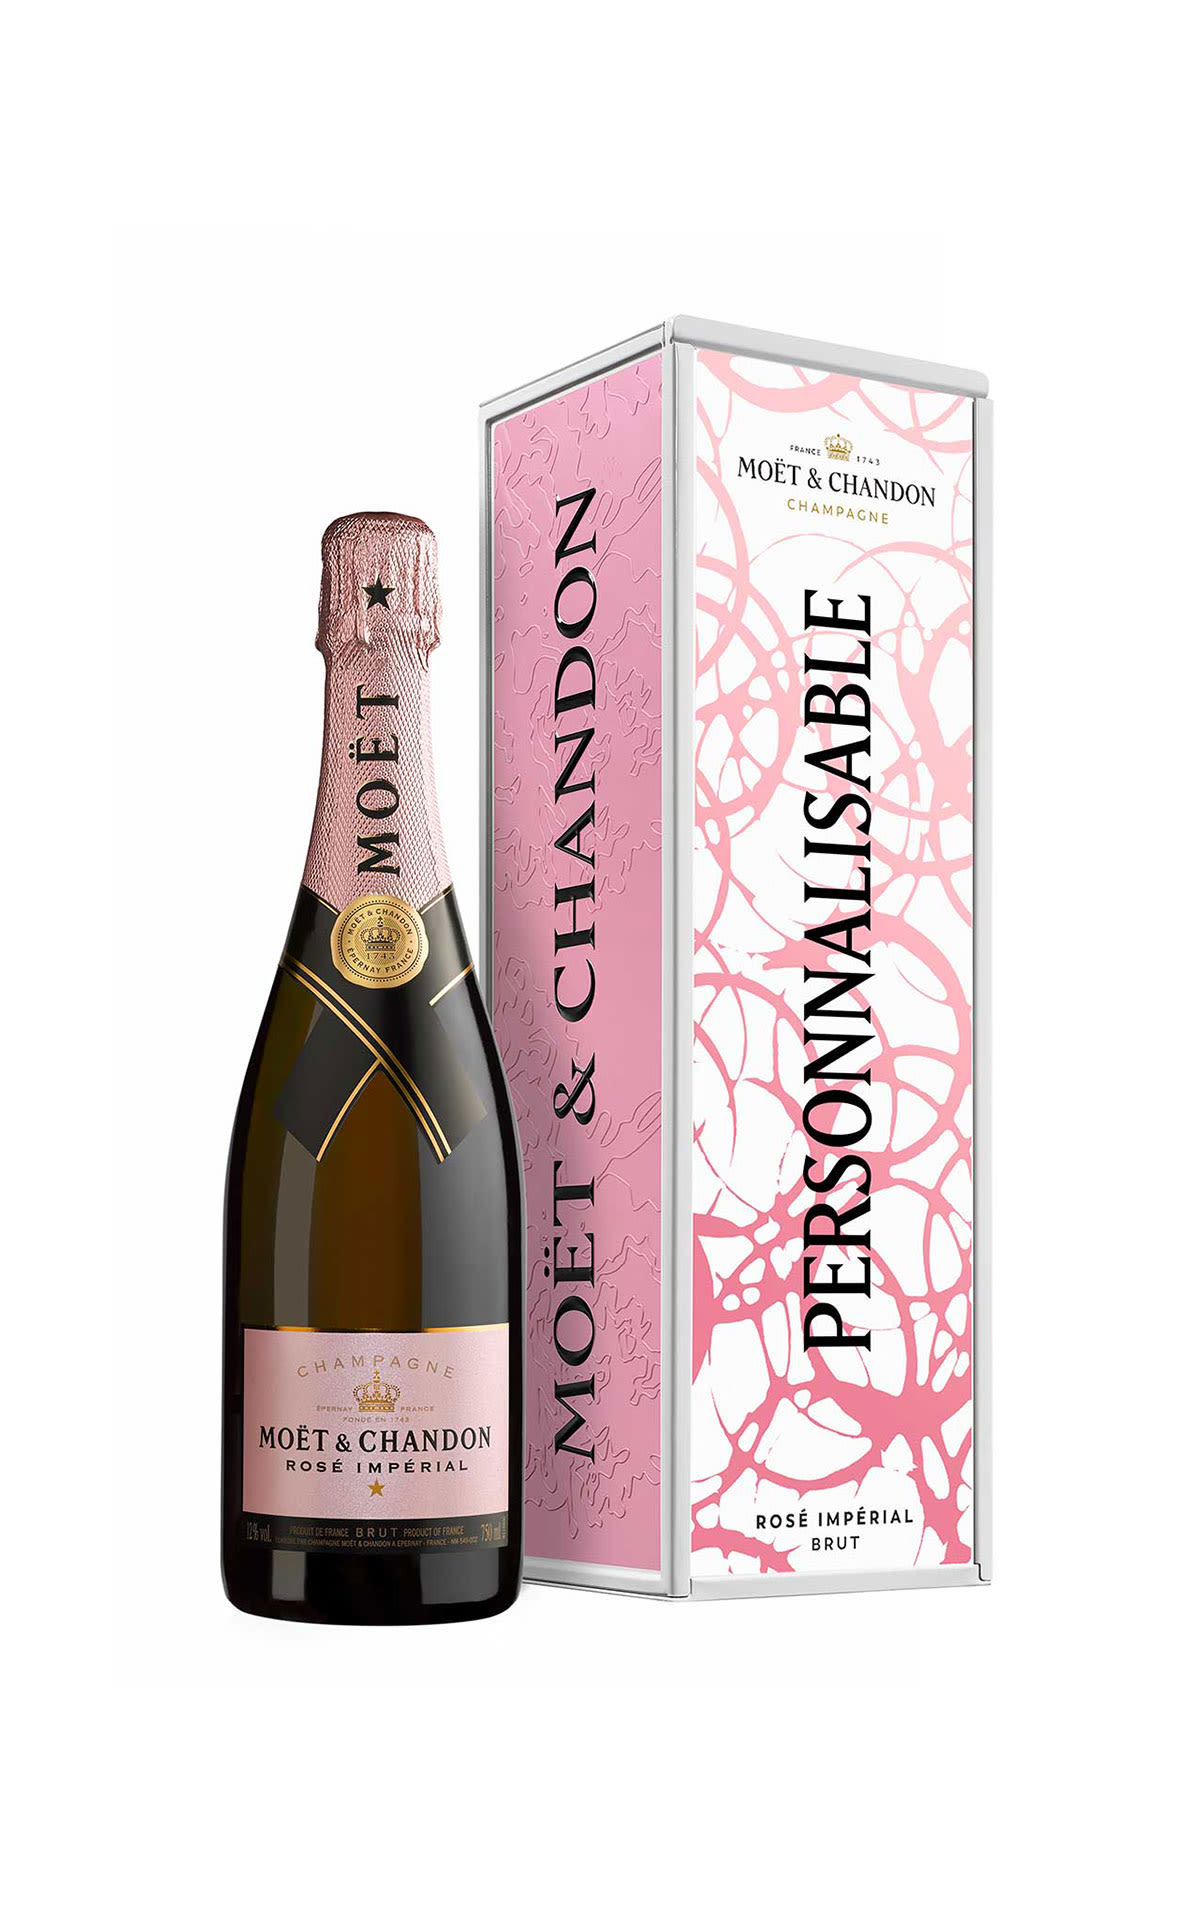 Veuve Cliquot Moet chandon rose' Imperial personalise me from Bicester Village